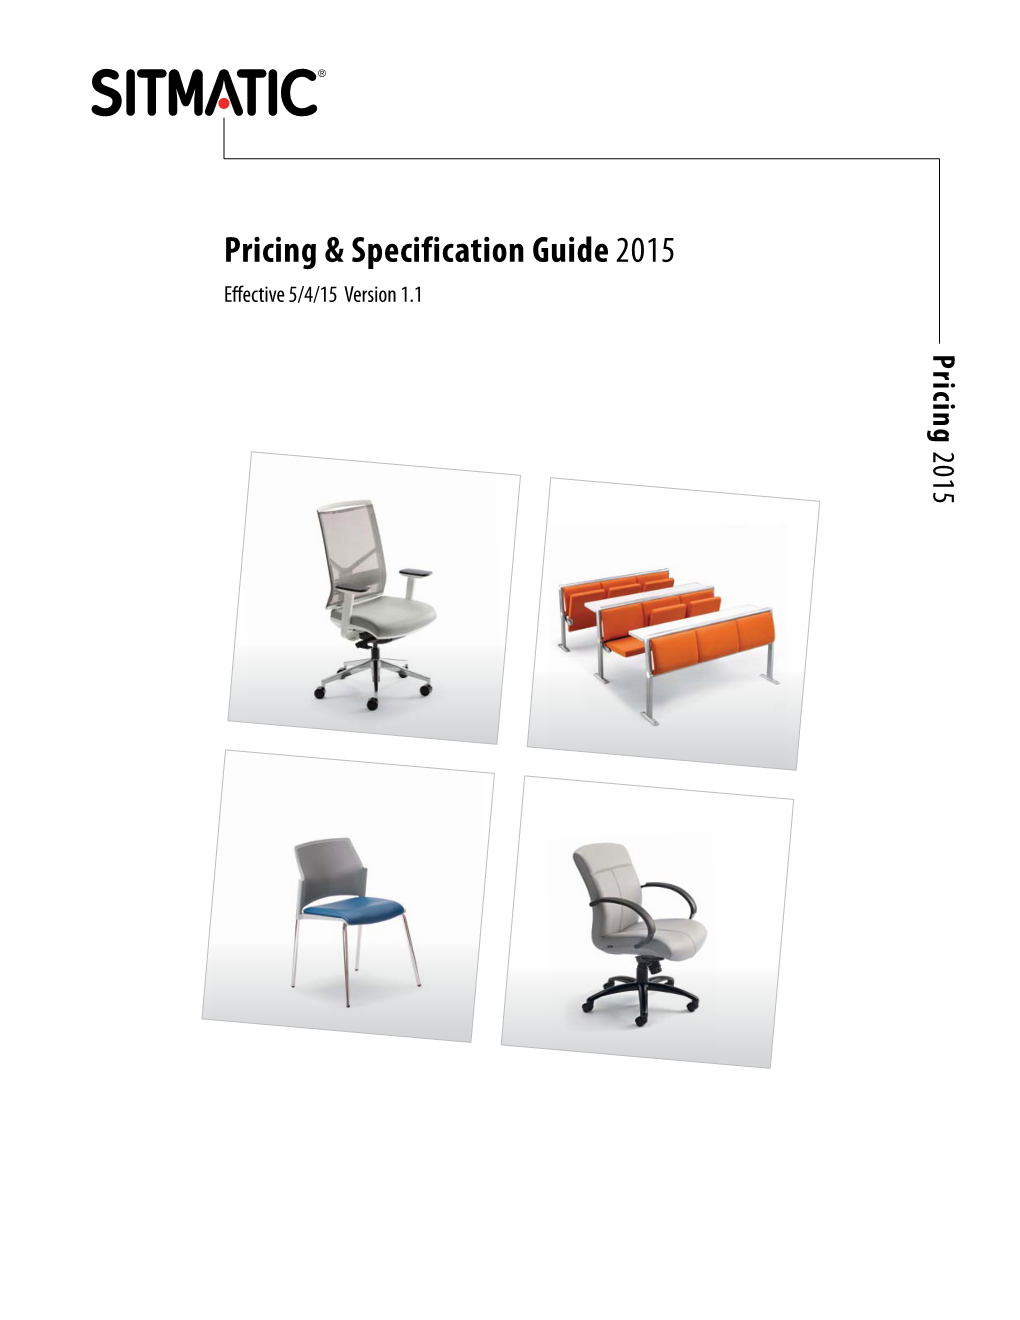 Pricing & Specification Guide 2015